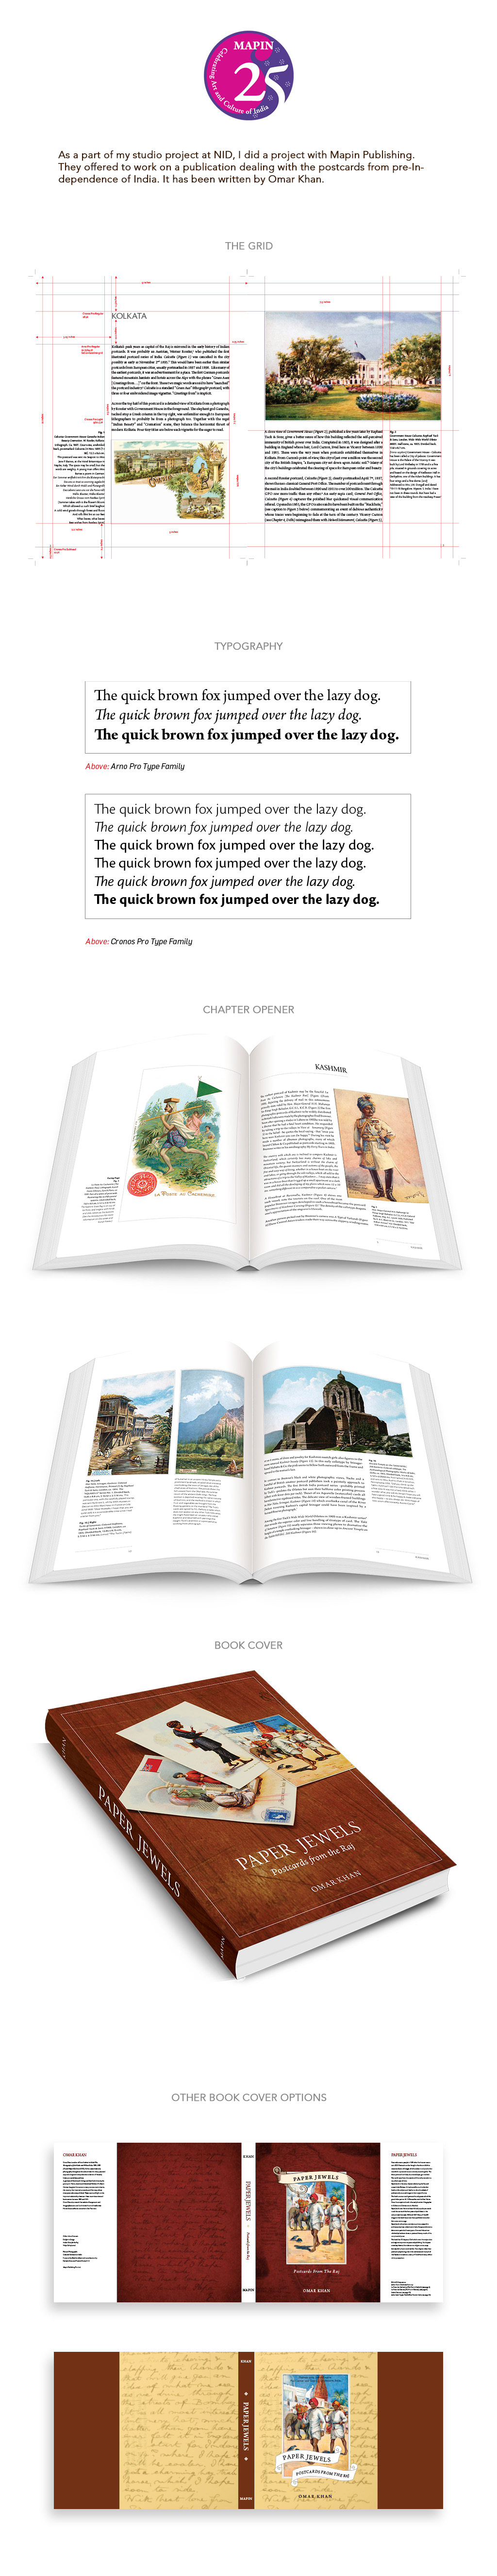 publication design Design and Layout typesetting